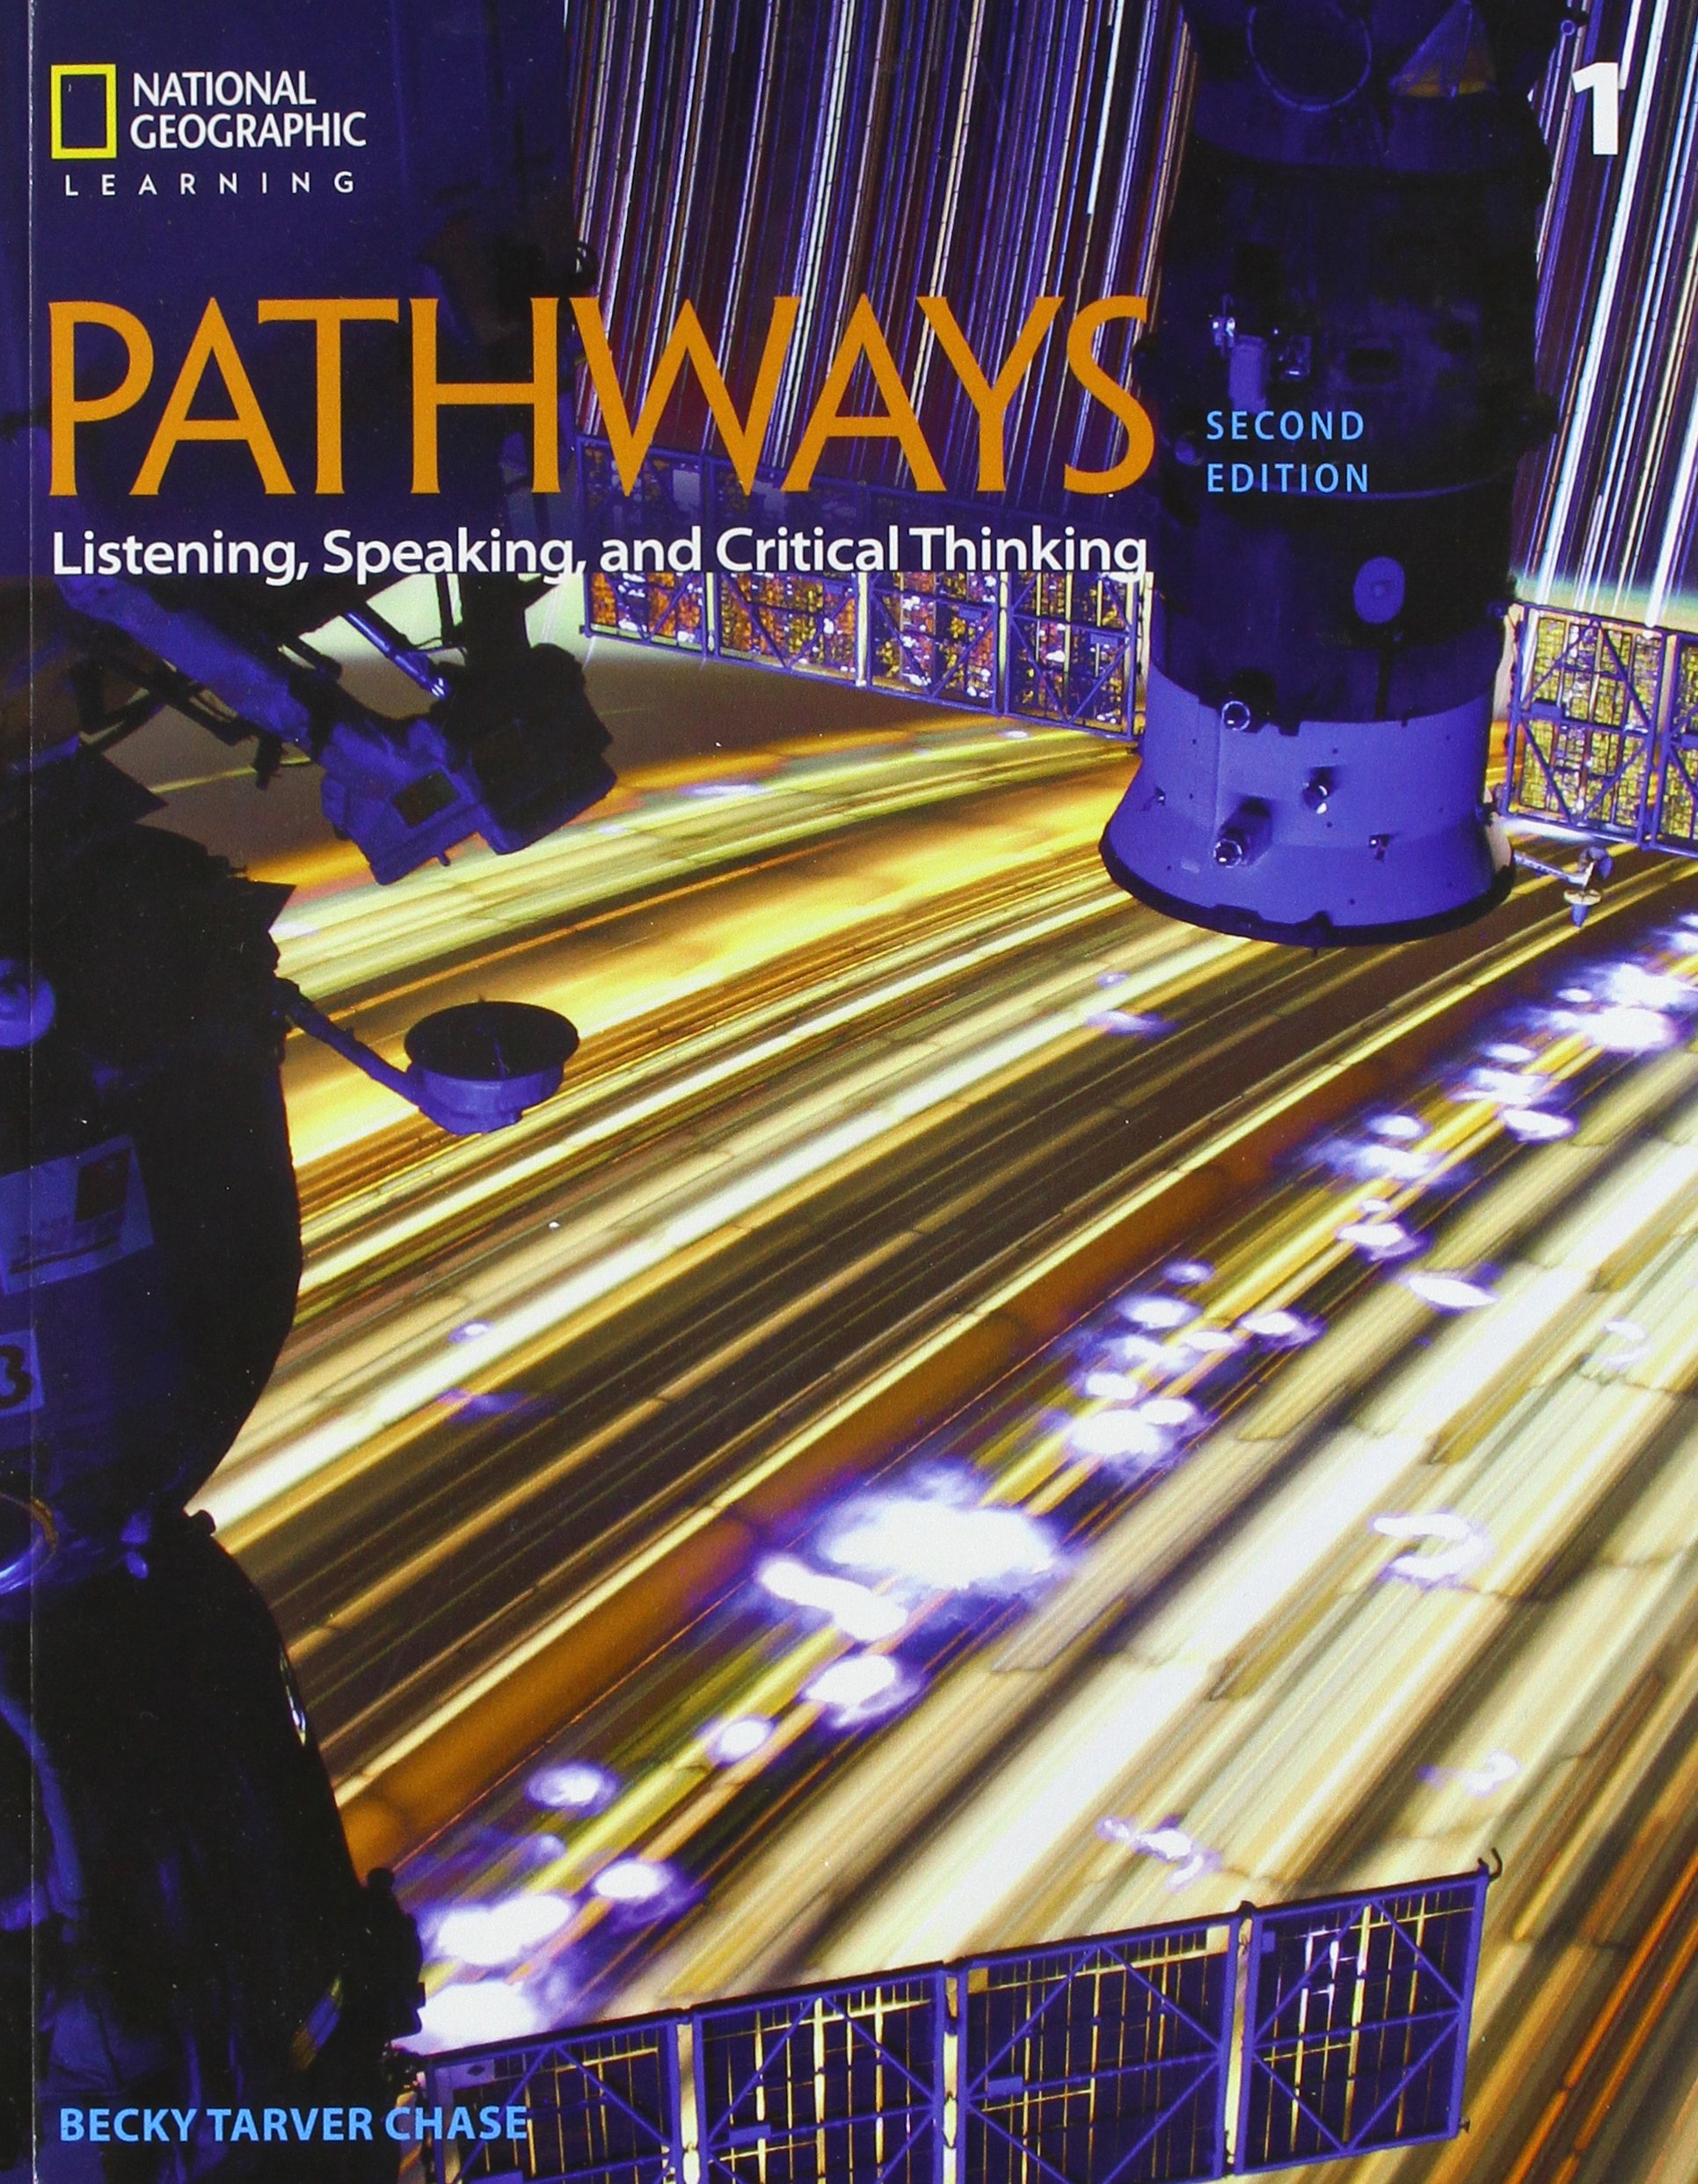 pathways 1 listening speaking and critical thinking second edition pdf